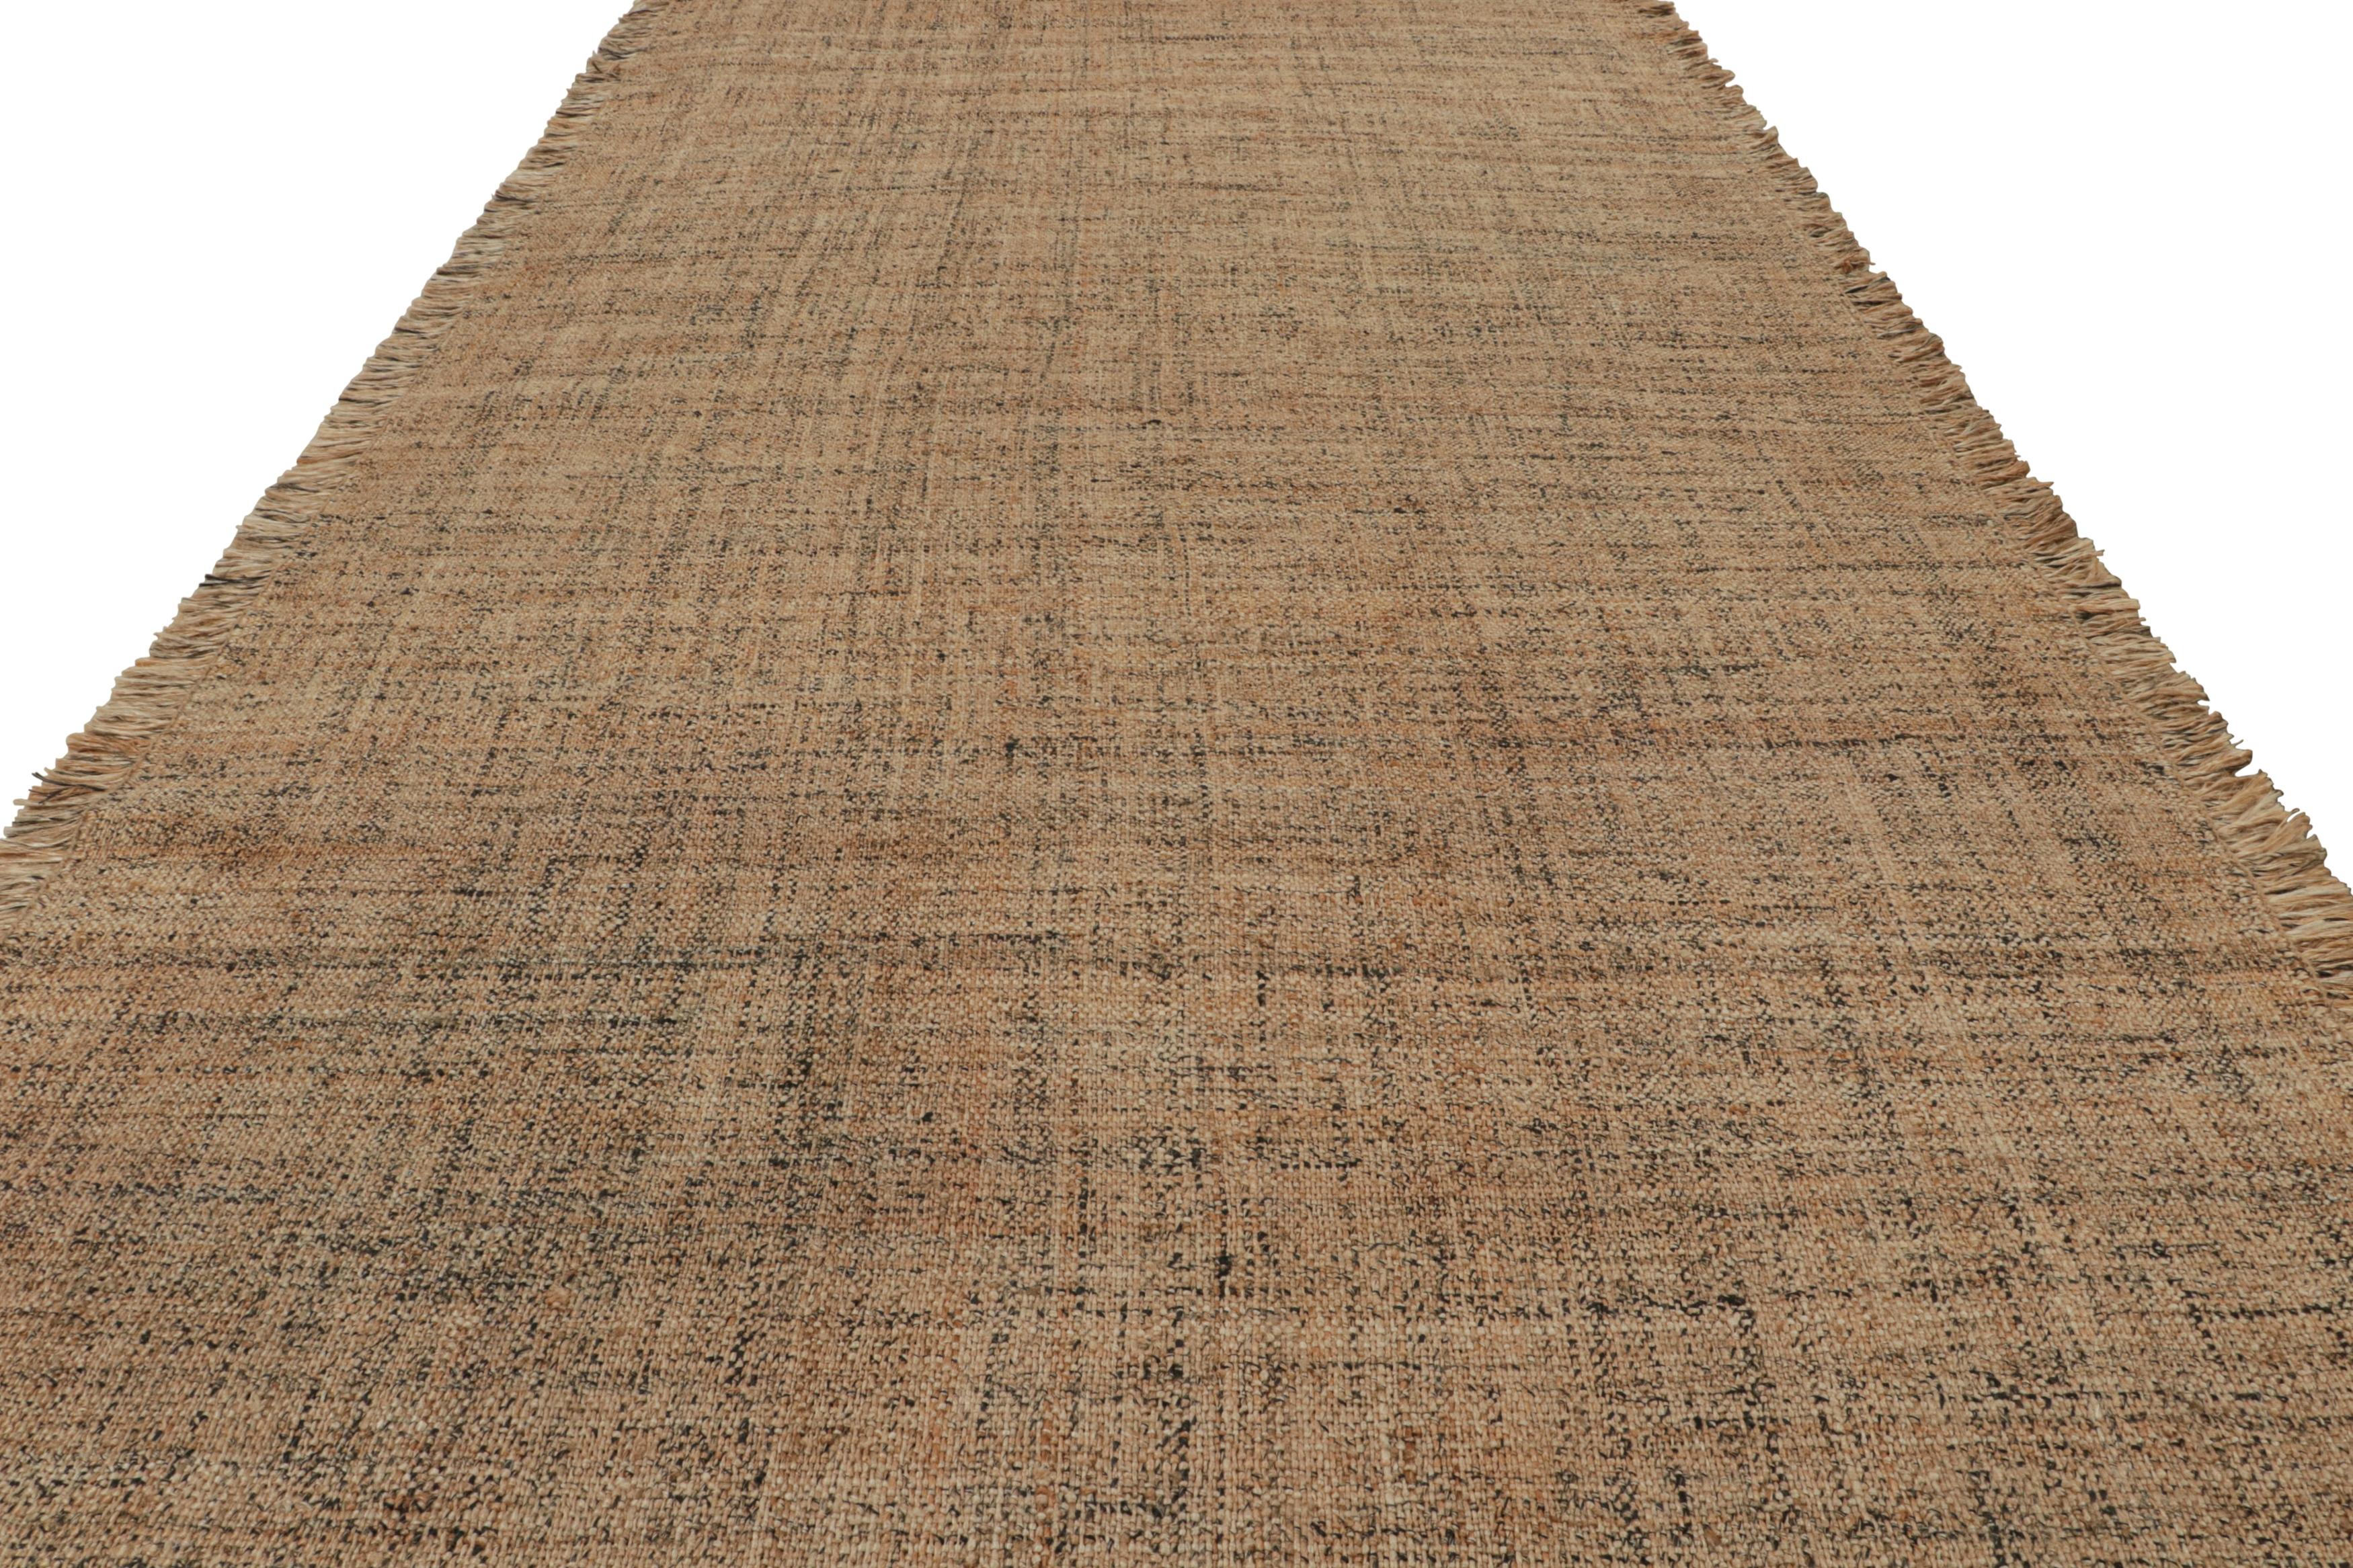 Modern Rug & Kilim’s Contemporary Rug in Beige-Brown Striae and Gold and Black Accents For Sale